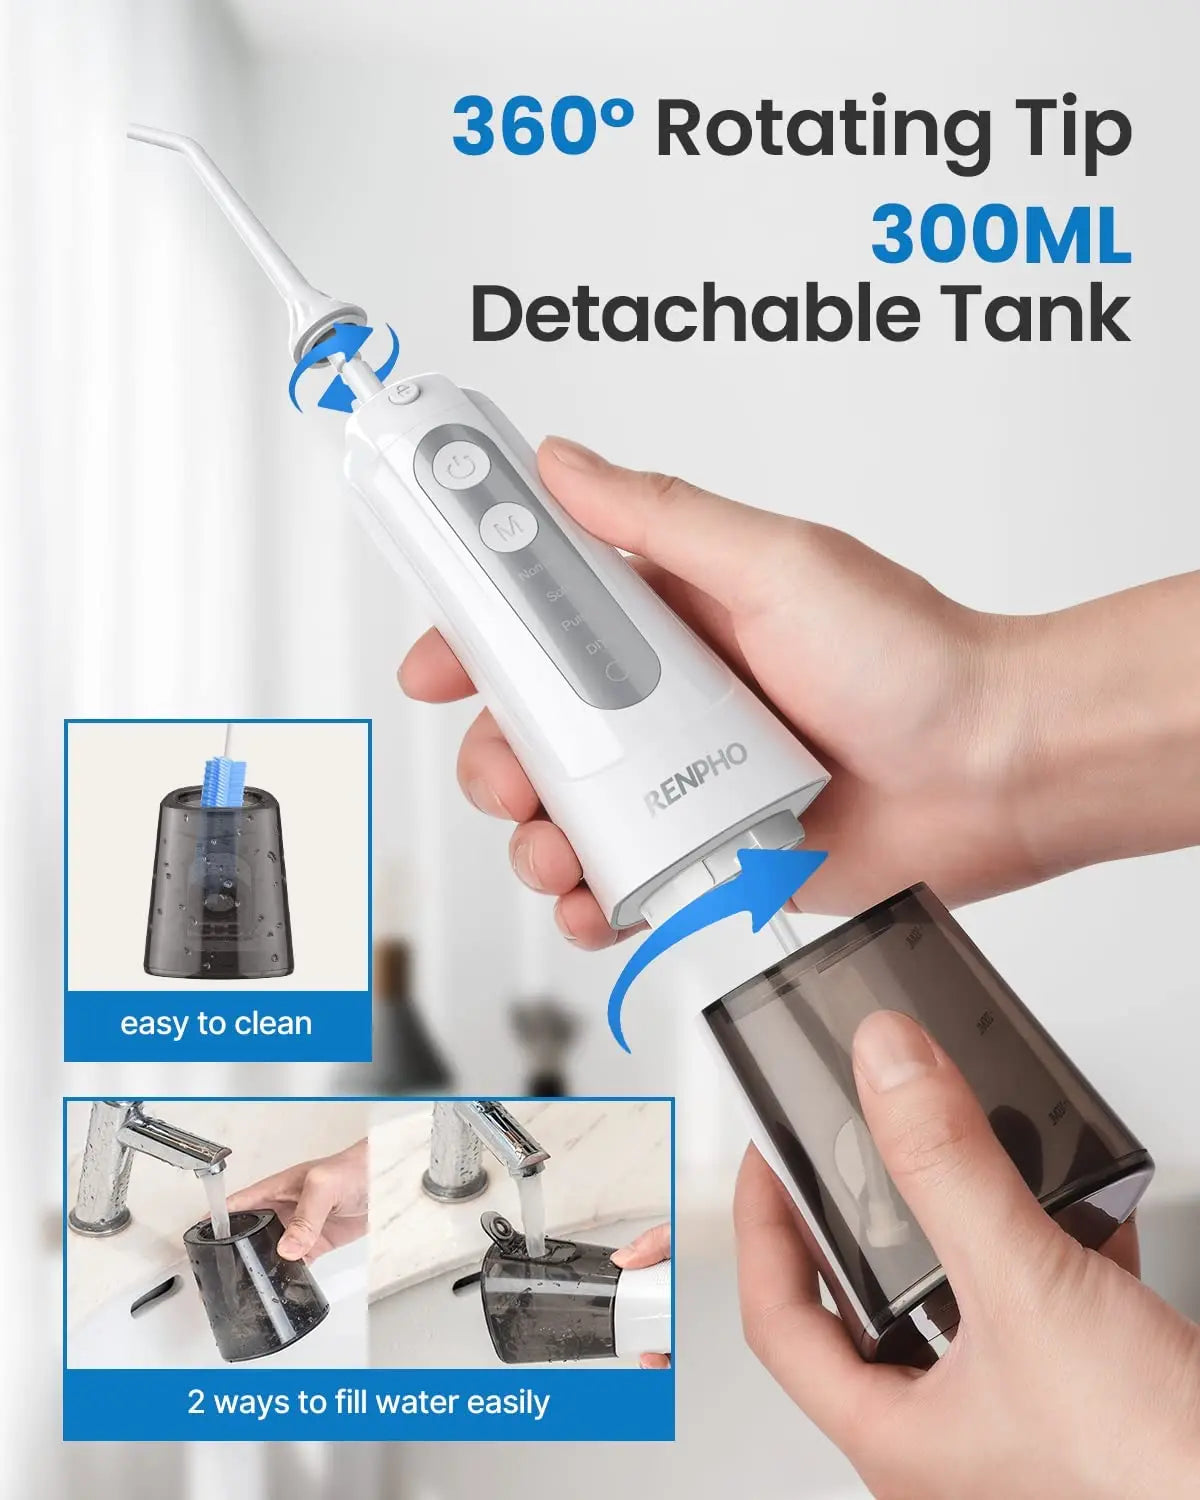 Image of a white Renpho EU Cordless Water Flosser being demonstrated. Key features include 360° rotating tips and a 300ML detachable tank. Insets show the tank being cleaned and filled, highlighting two easy filling methods: directly from a faucet and pouring from another container.